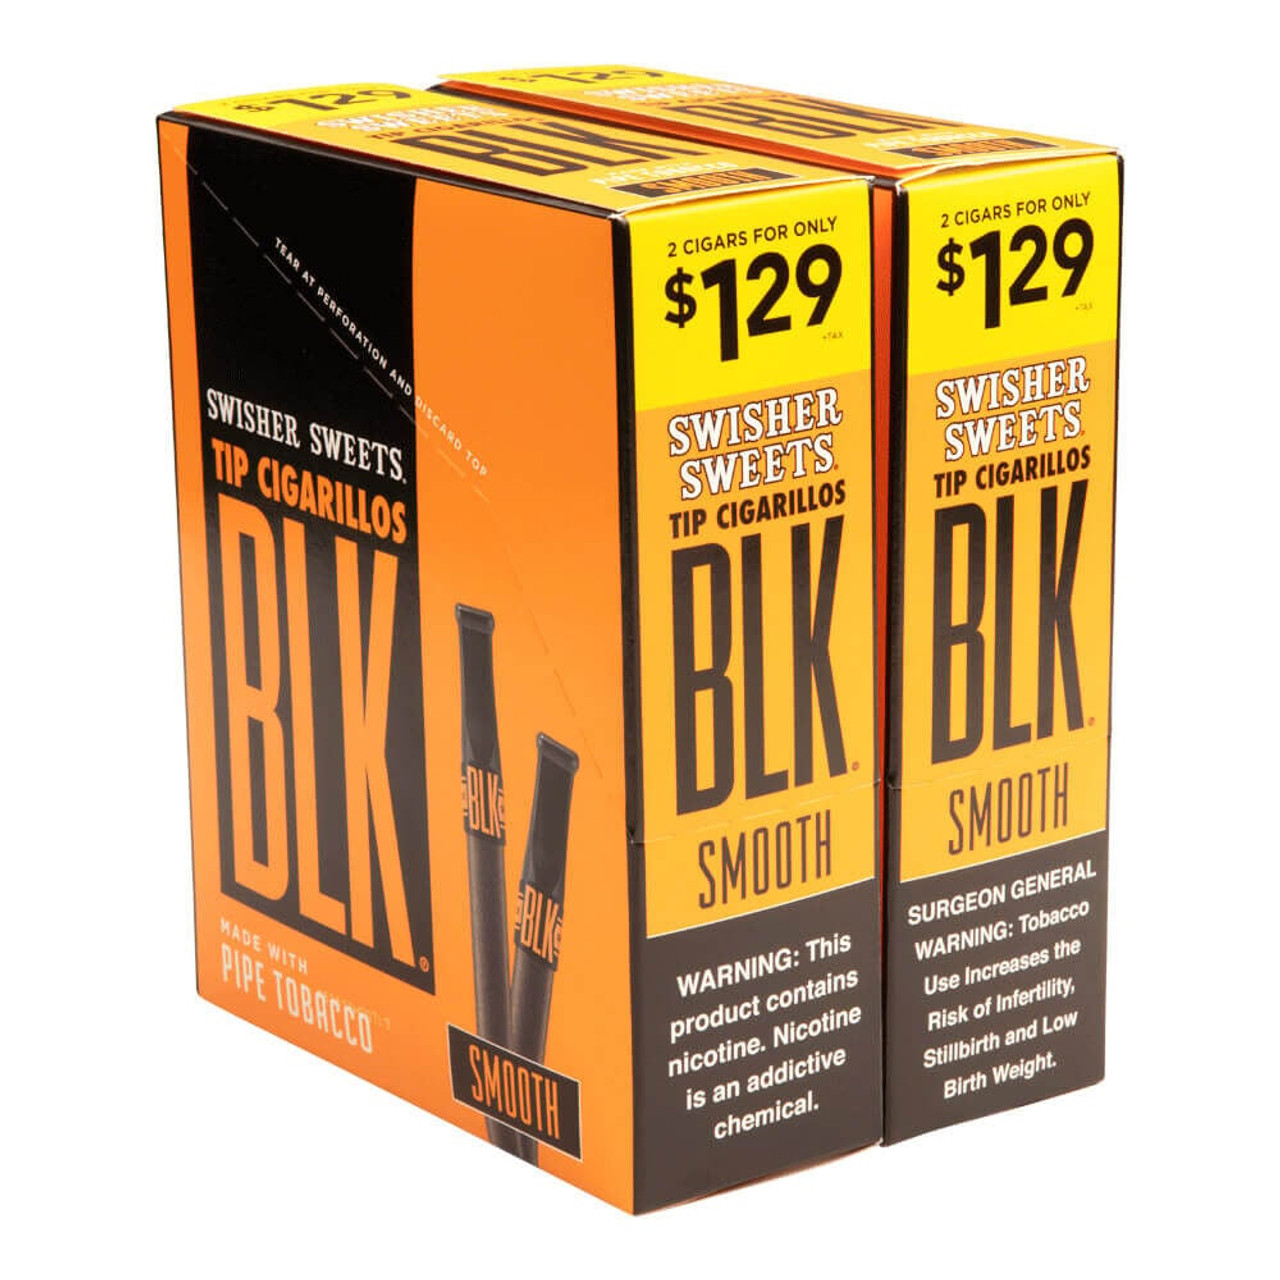 Swisher Sweets BLK Cigarillos Smooth Tip Cigars - 4 x 30 (30 Packs of 2 (60 Total)) *Box